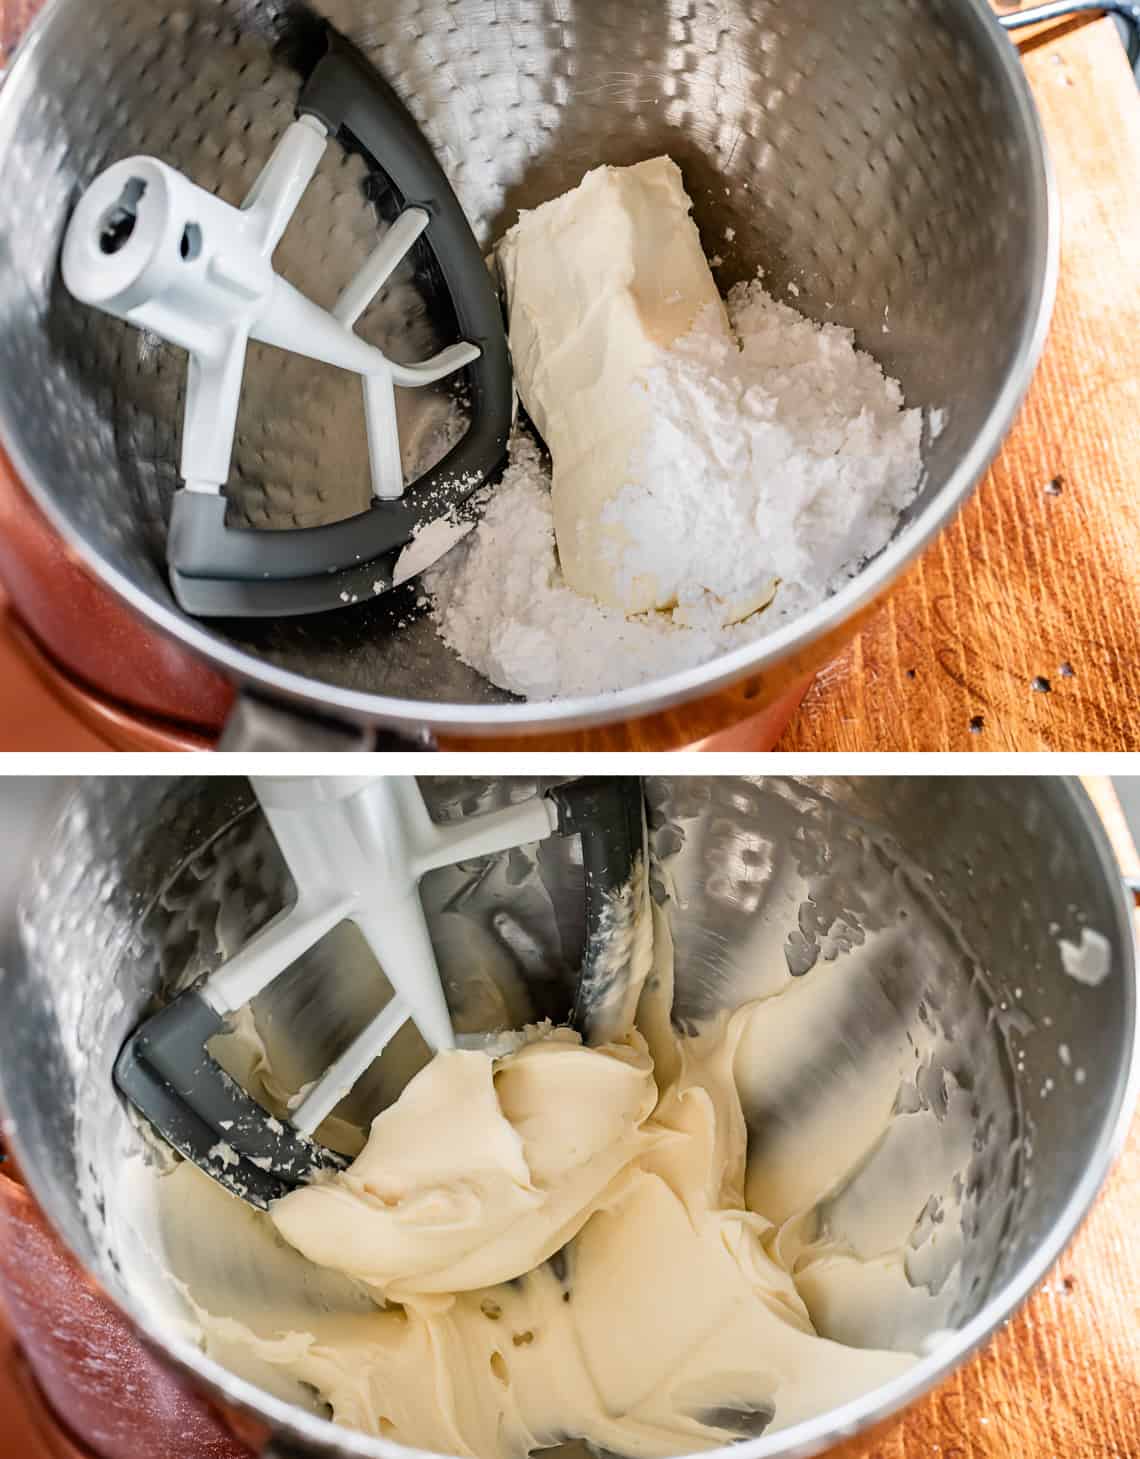 top cream cheese and powdered sugar in mixing bowl, bottom all mixed together smoothly.